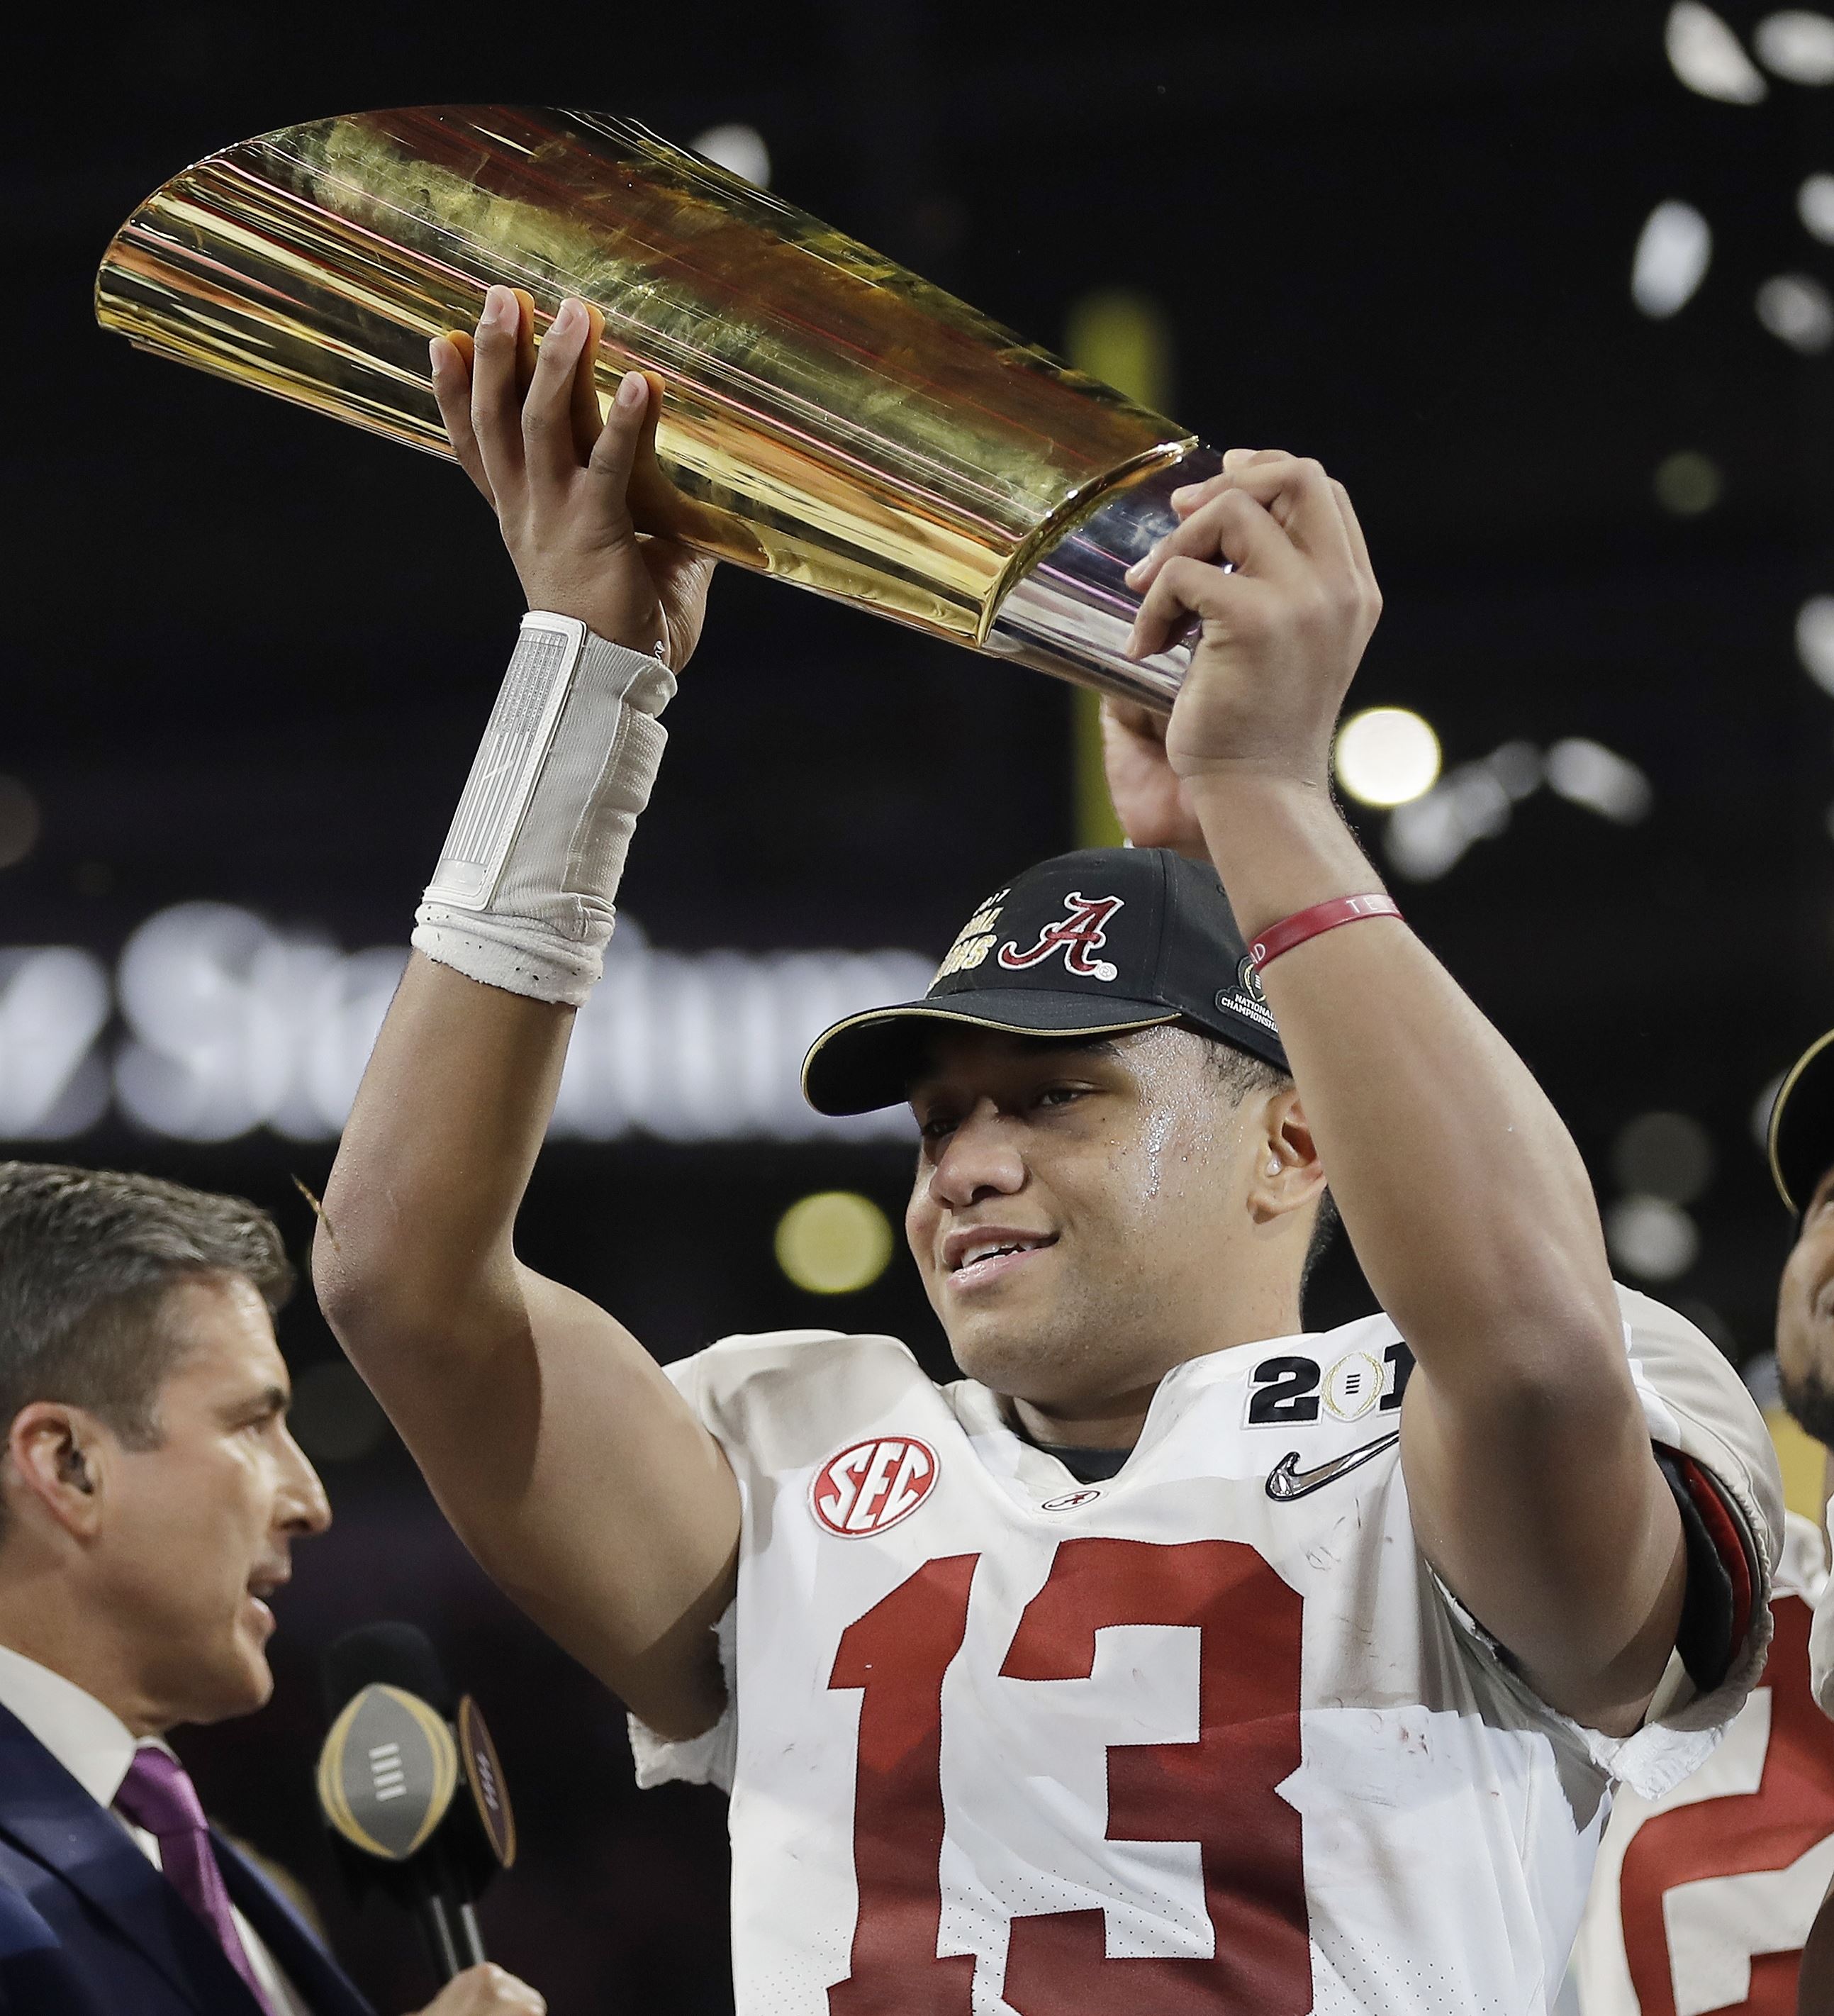 Alabama rallies, wins 5th football national title in 9 years - The Blade